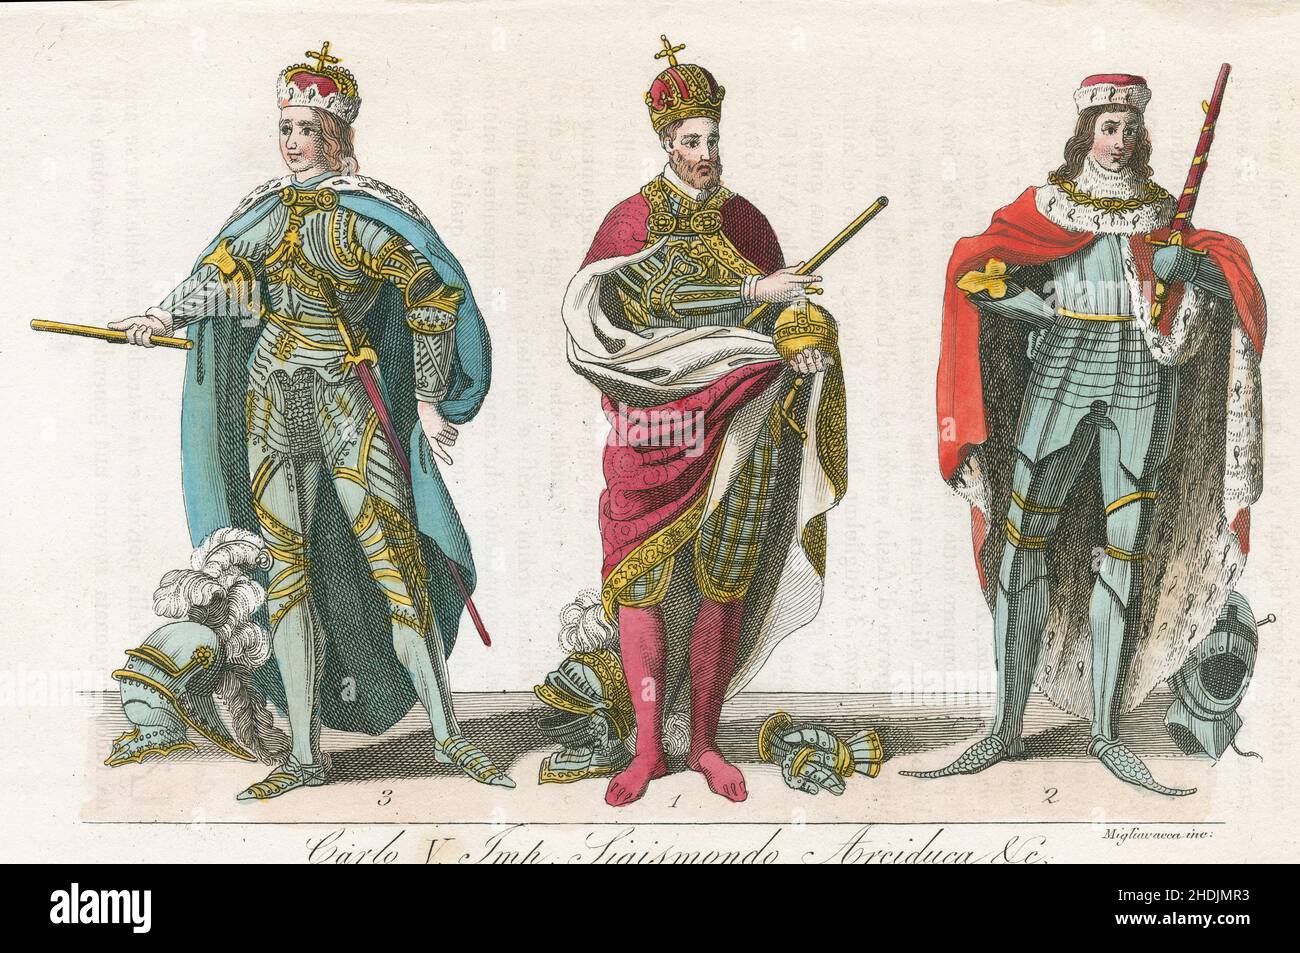 Antique c1830 hand-tinted engraving, 14th century French royal fashion with Charles V of France (1338-1380), Archduke Sigismund, and other. Published by Giulio Ferrario. SOURCE: ORIGINAL ENGRAVING Stock Photo